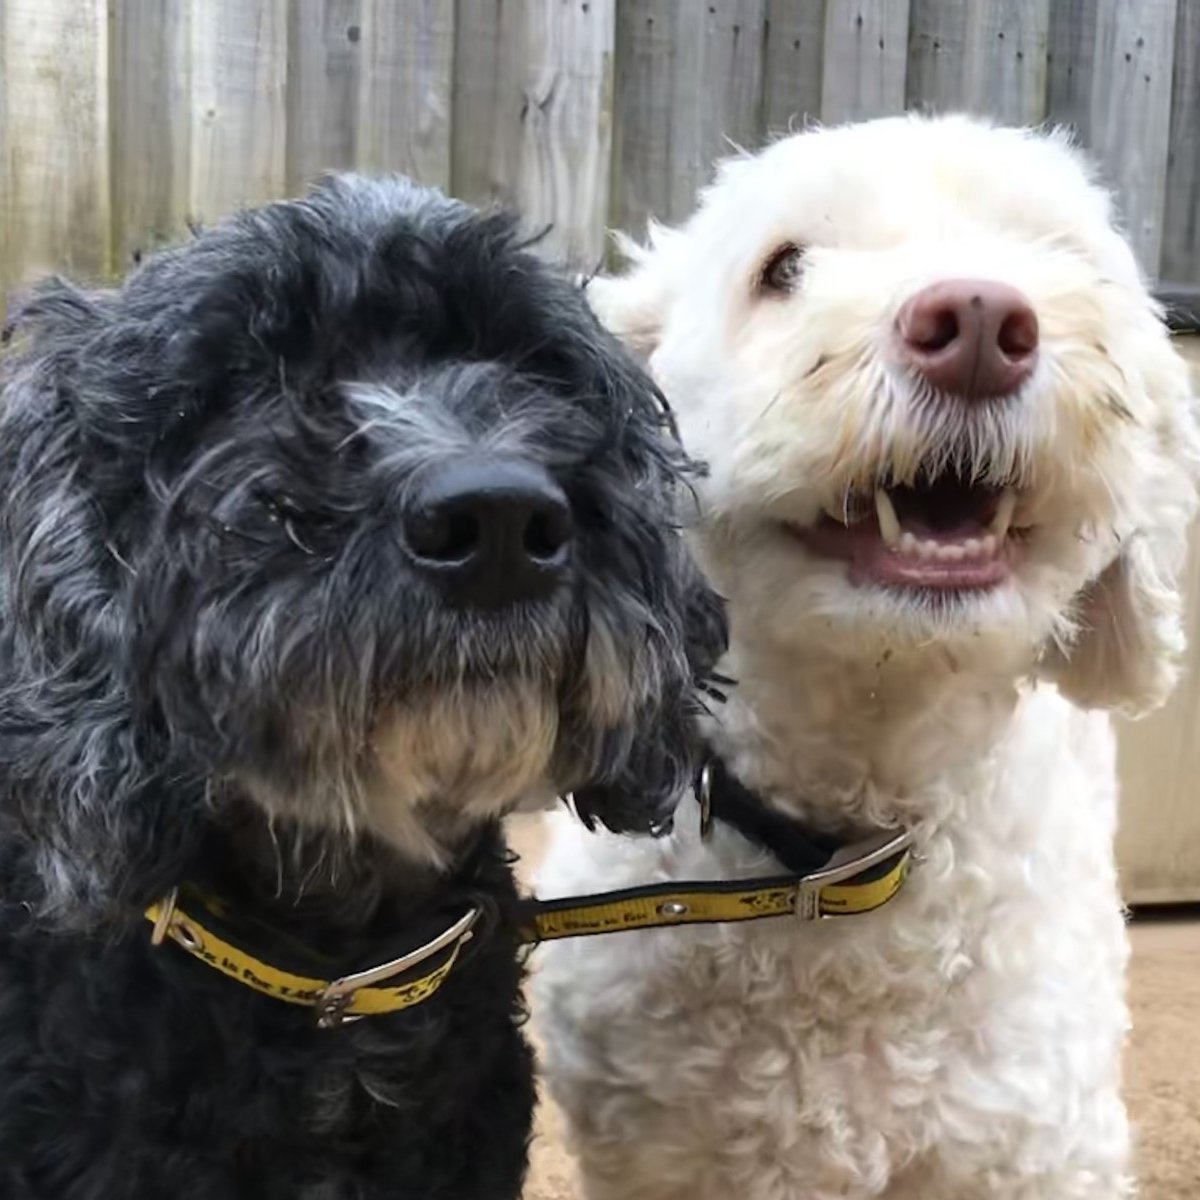 DILLON and SOPHIE are a well bonded pair of 8-year-old Cockerpoos @DogsTrust #Ilfracombe looking to be rehomed together. 💛🐶💛 They gain confidence from being with each other. 🐾 dogstrust.org.uk/rehoming/our-c… 🏡 
#RescueDogs #AdoptADoggyDuo #ADogIsForLife